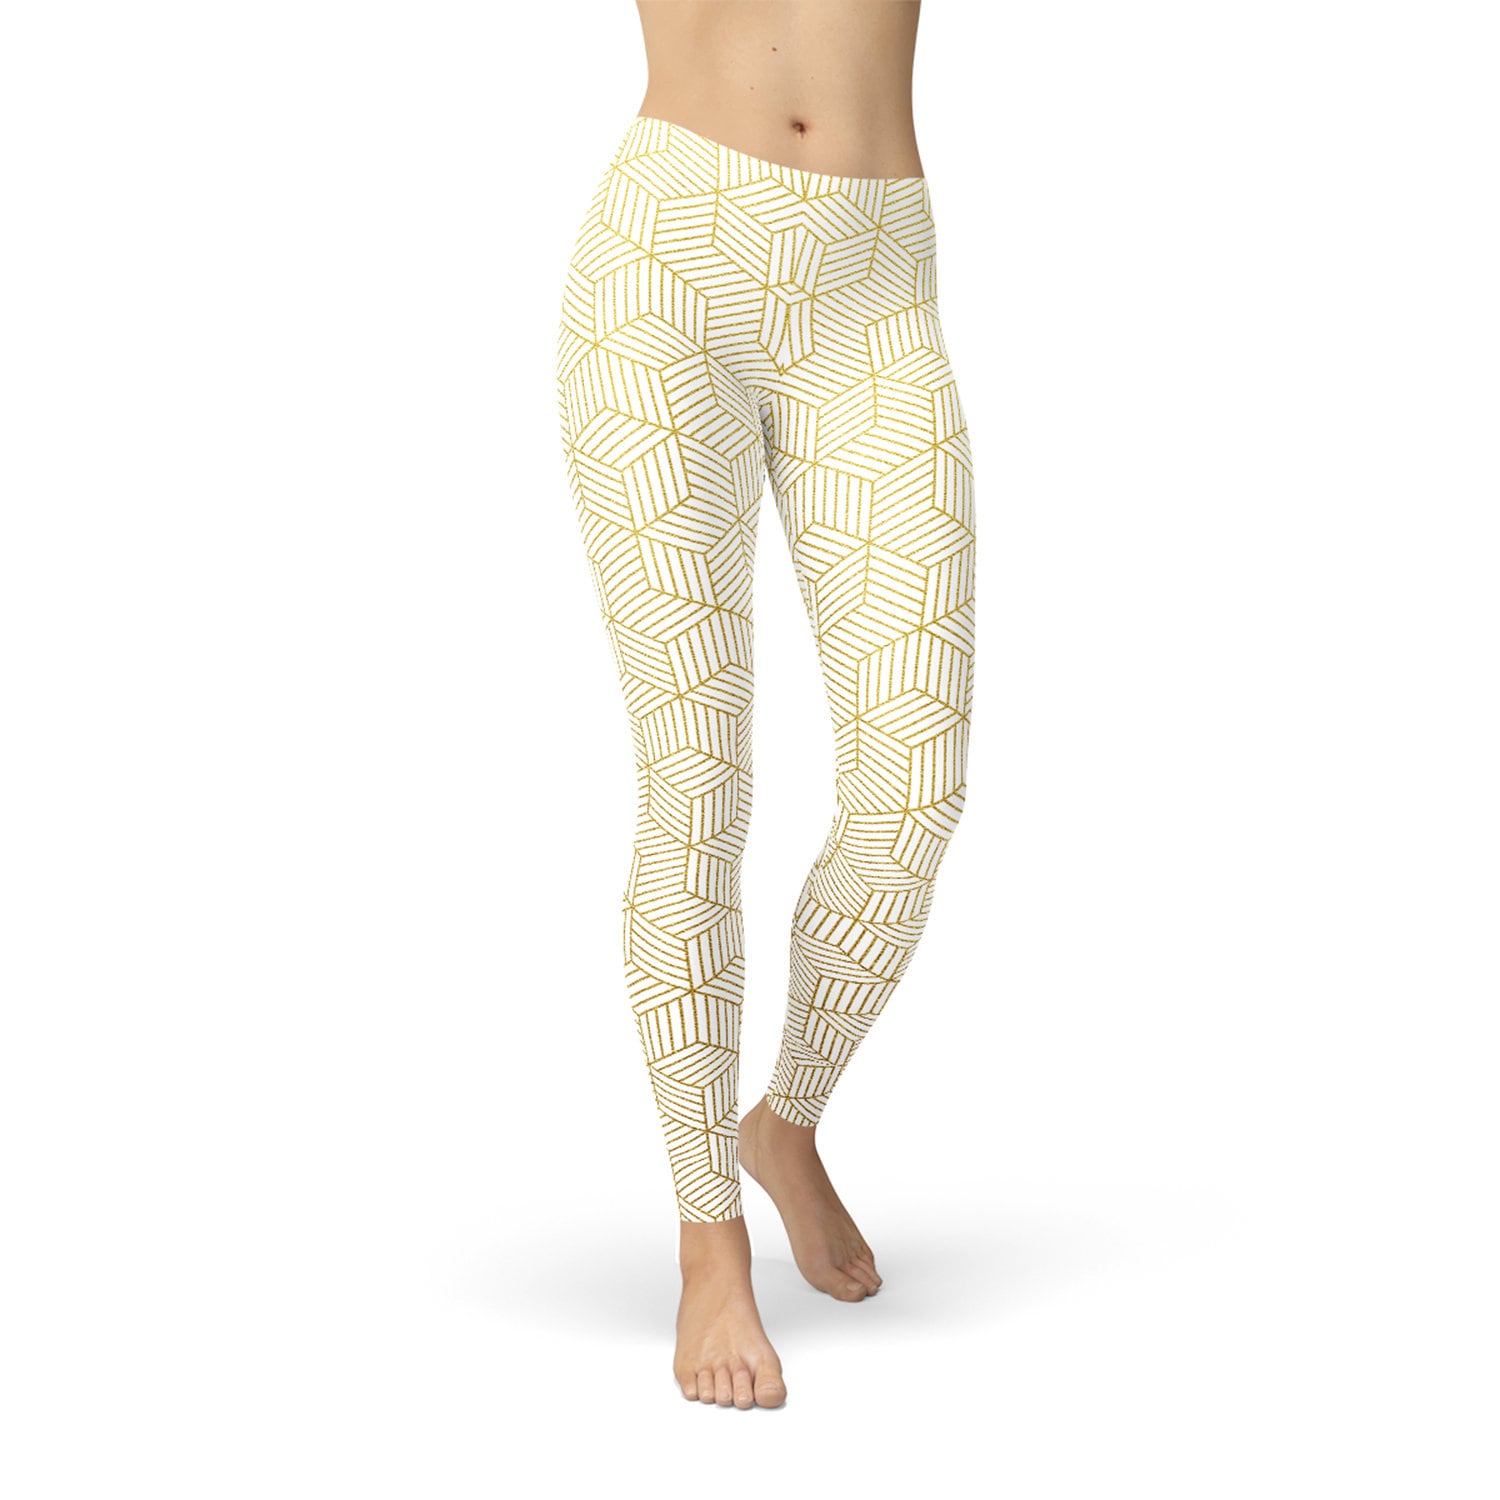 Buy White Yoga Pants Online In India -  India